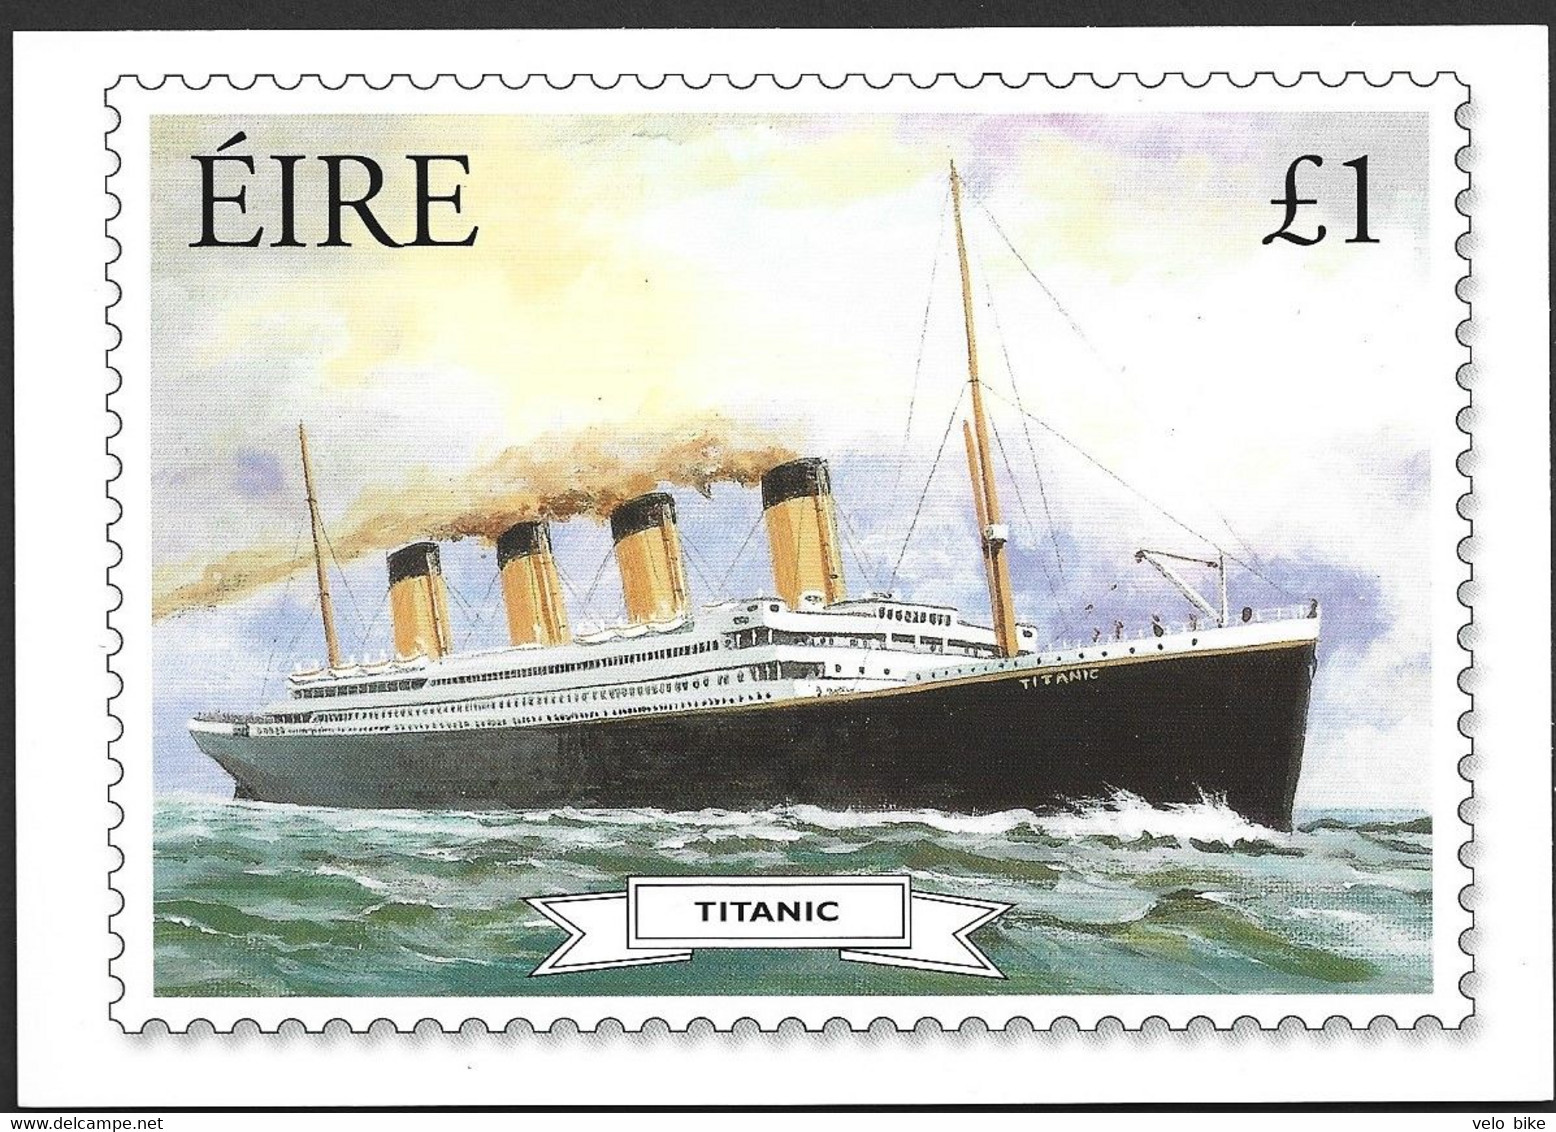 Eire Ireland Postal Stationery Postage Paid Cork 2005 Titanic Ocean Liner Ferry Boat  Priotaire Airmail - Enteros Postales